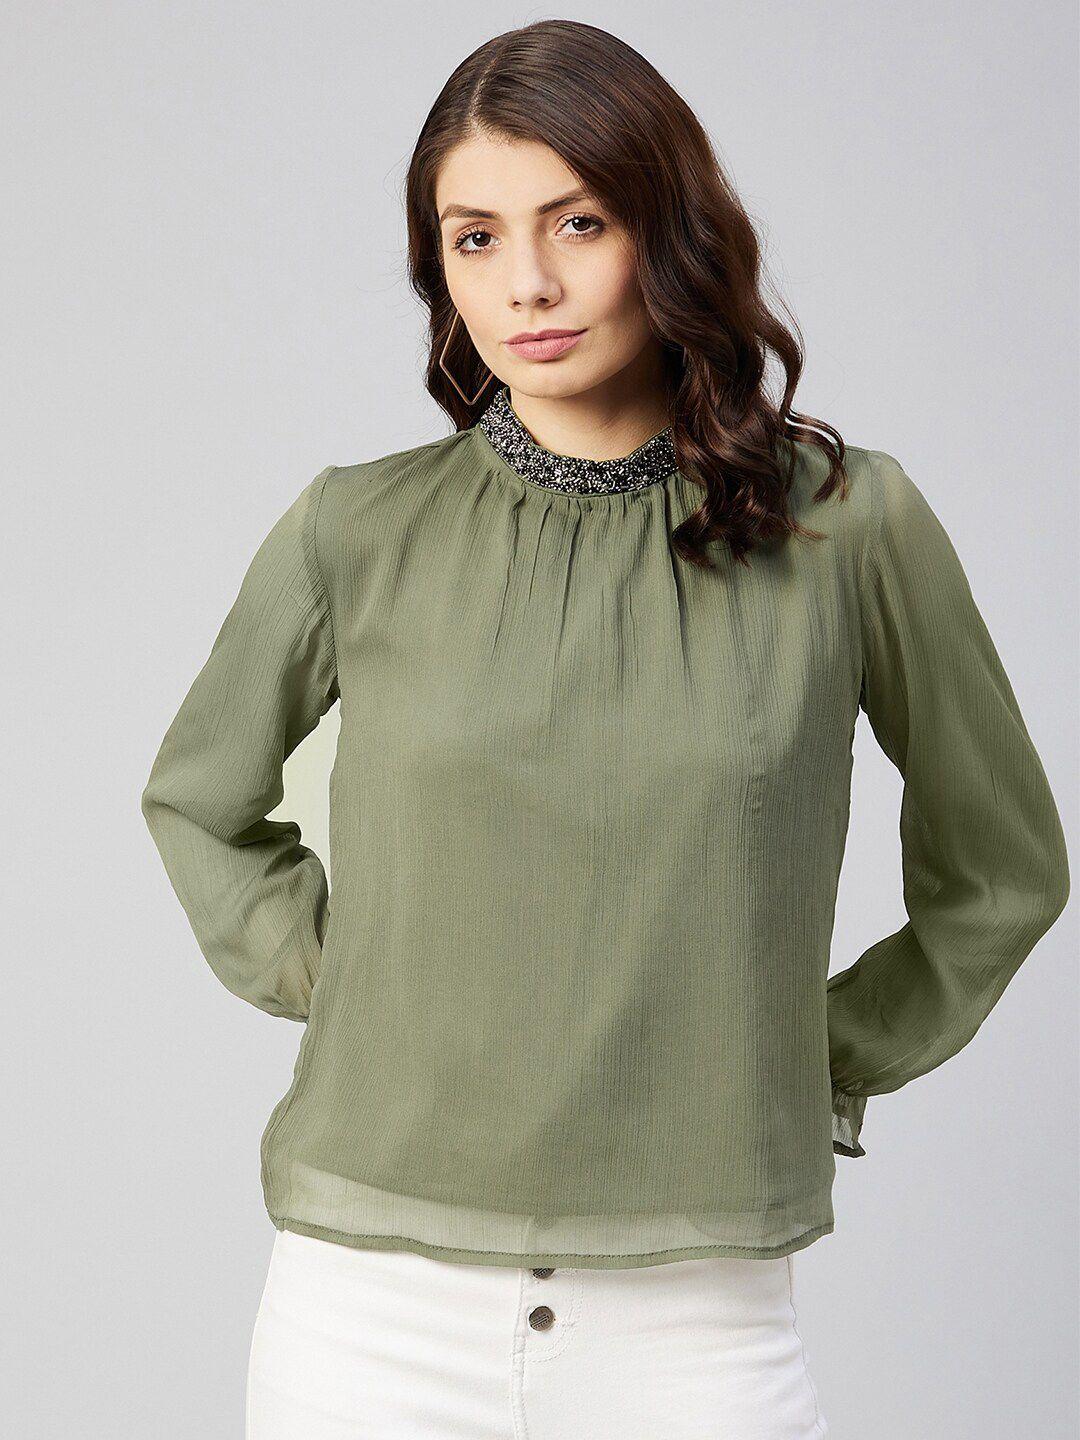 marie claire olive green solid crinkled chiffon top with tie-ups with embellished detail